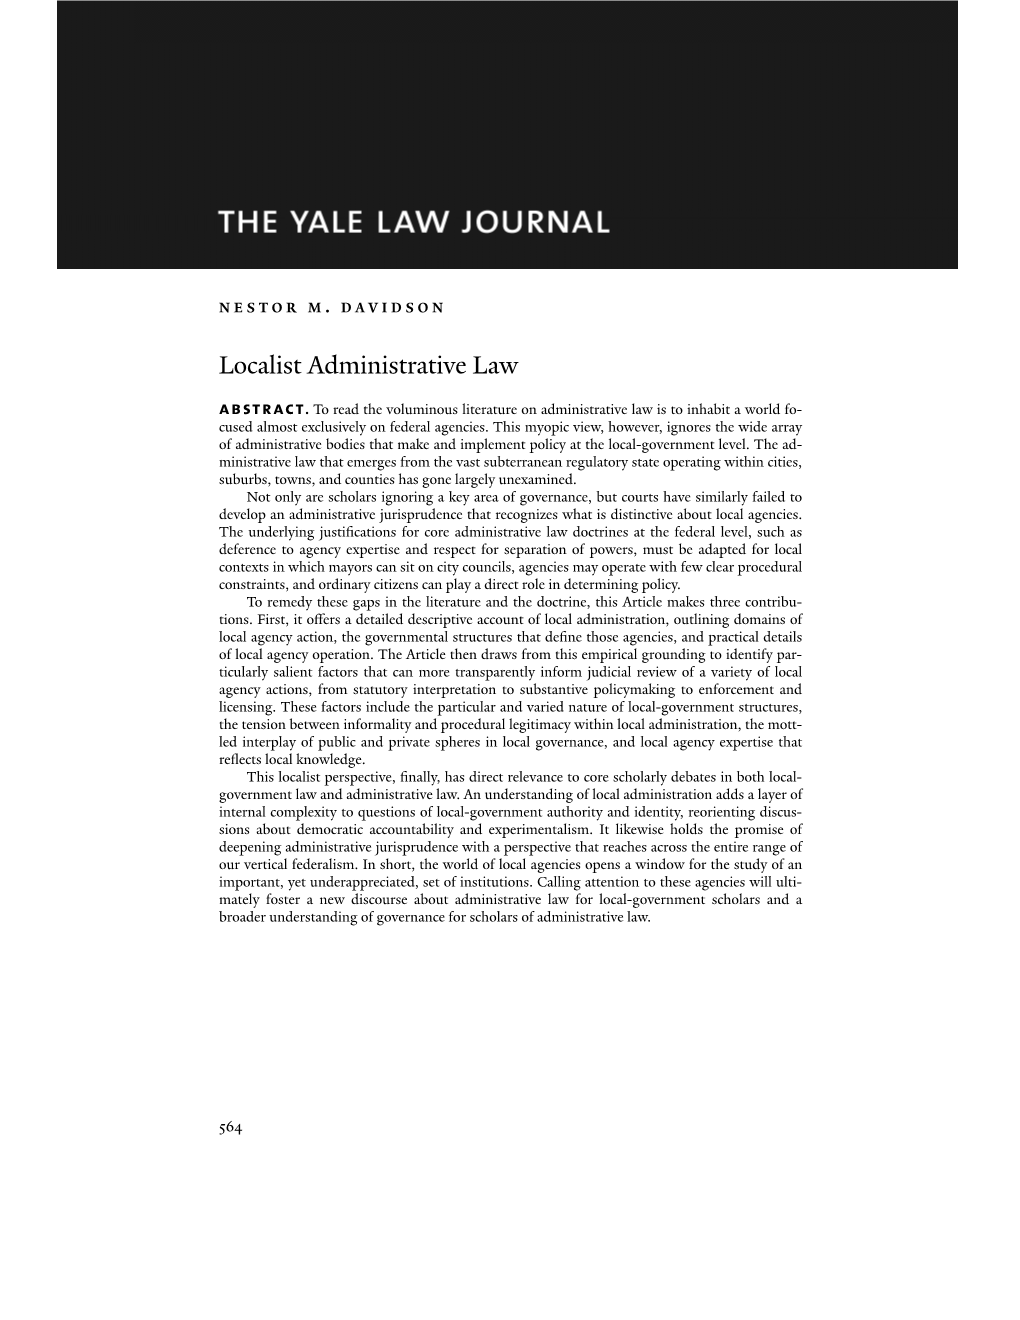 Localist Administrative Law Abstract